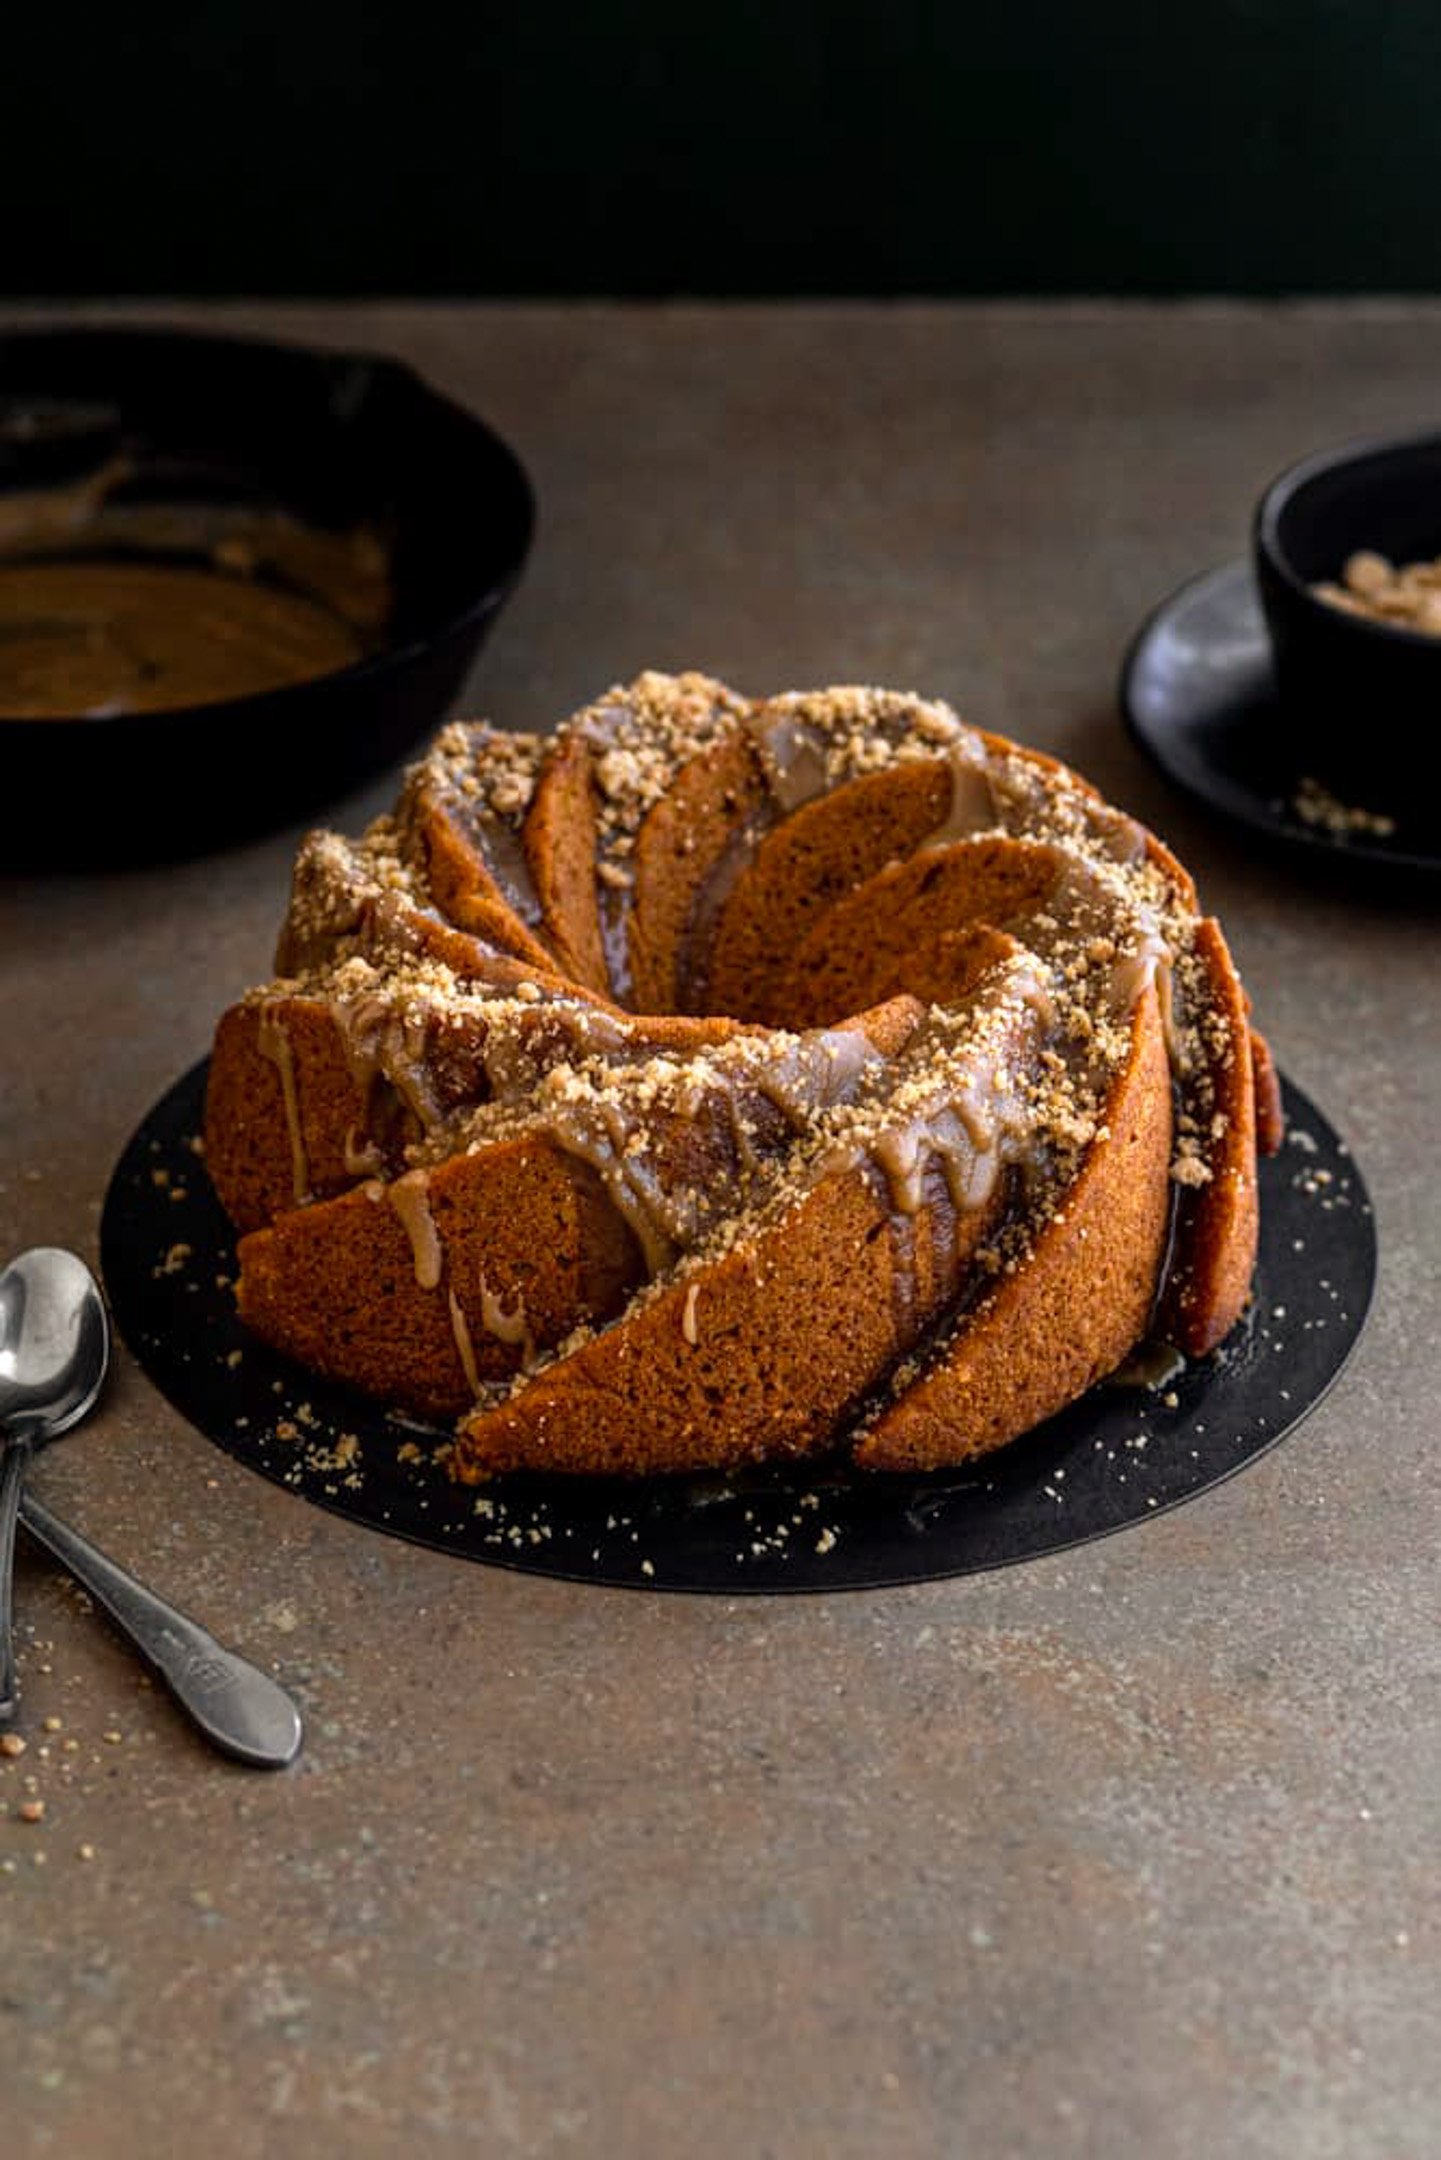 A bundt cake drizzled with glaze and streusel.